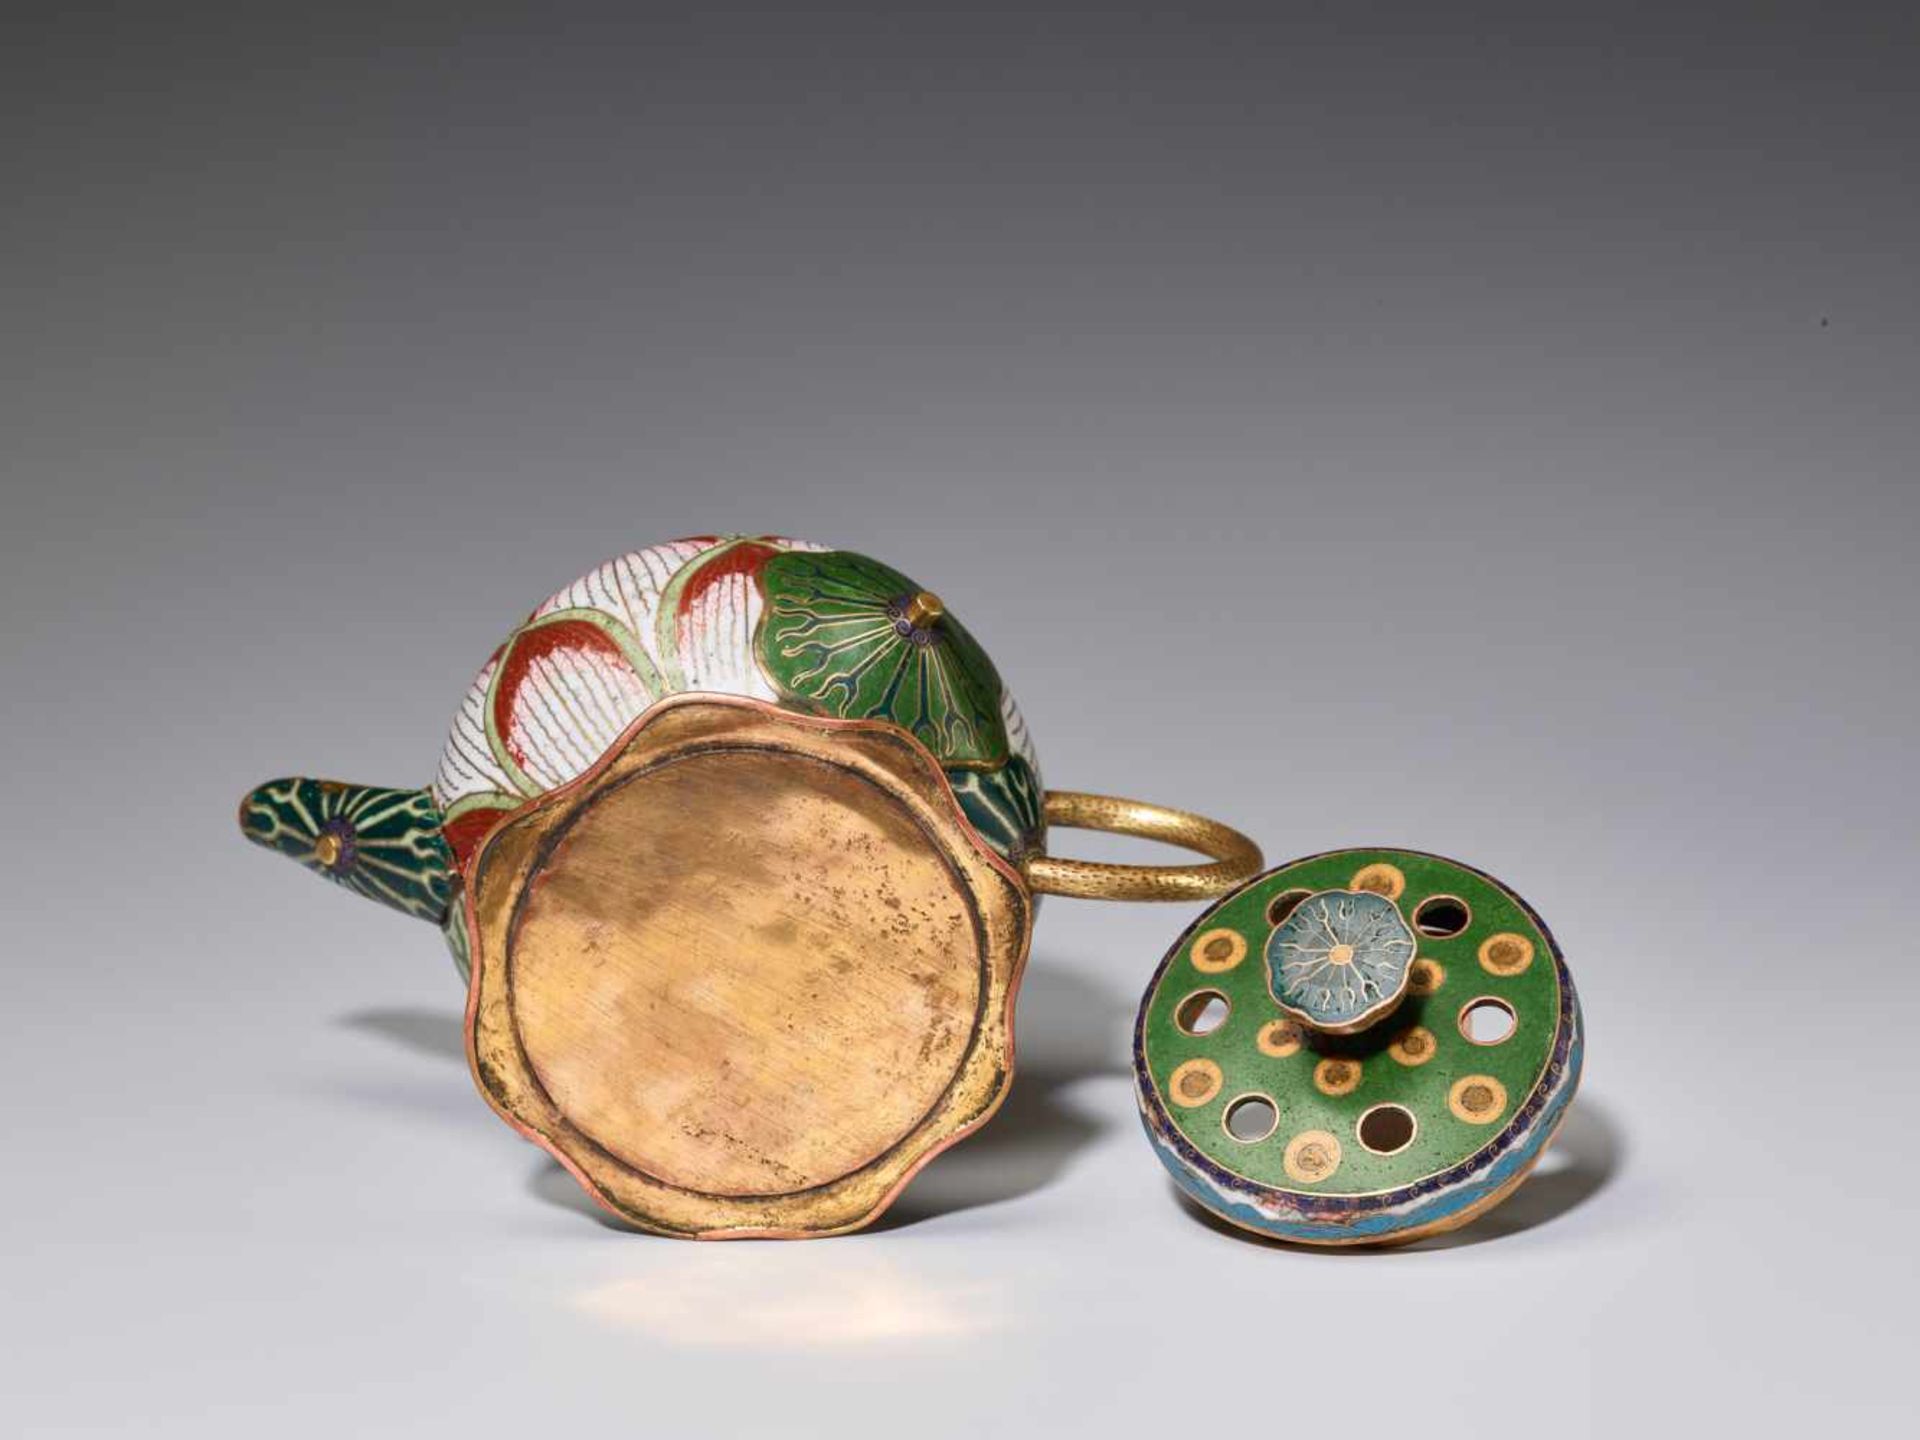 A EXTREMELY RARE CLOISONNE ENAMEL LOTUS-LEAF FORM EWER, 18TH CENTURYFire gilt and incised bronze, - Image 9 of 11